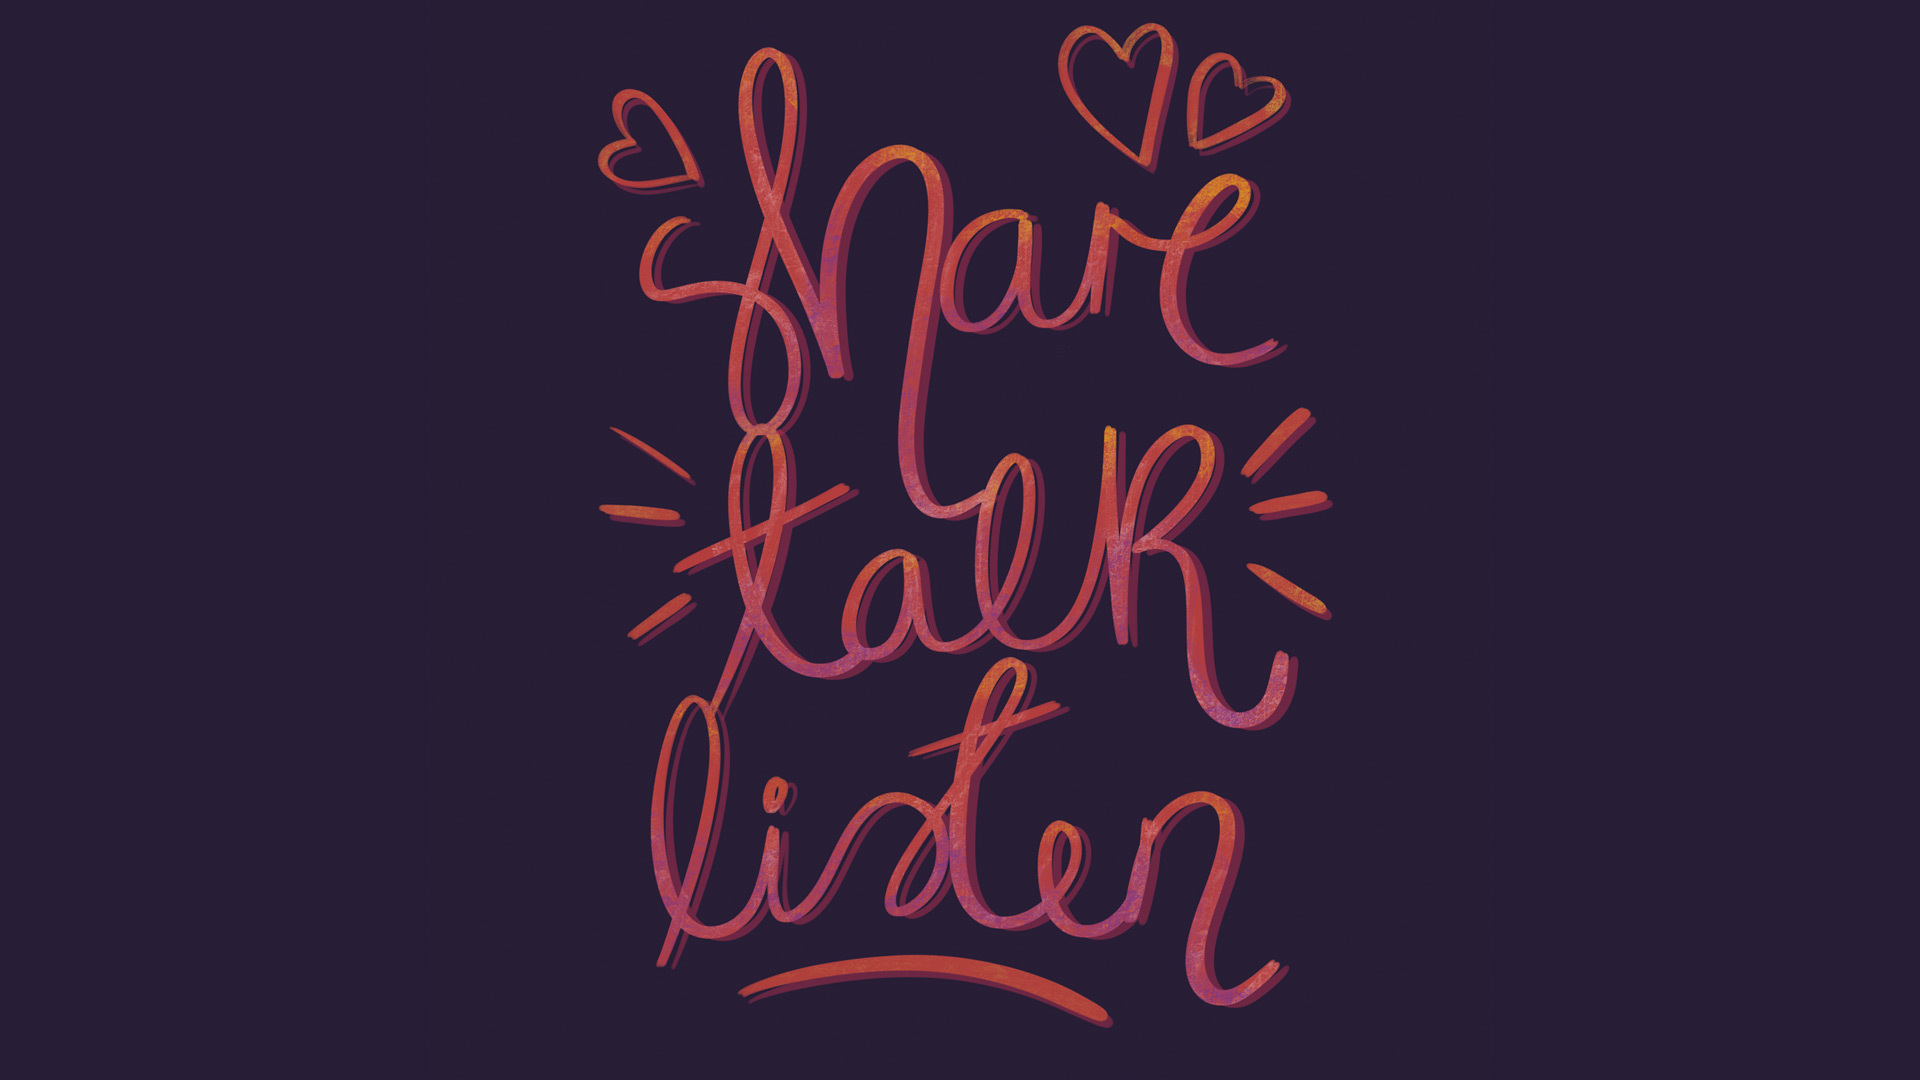 The words 'Share, Talk, Listen' depicted in lively hand-drawn lettering.